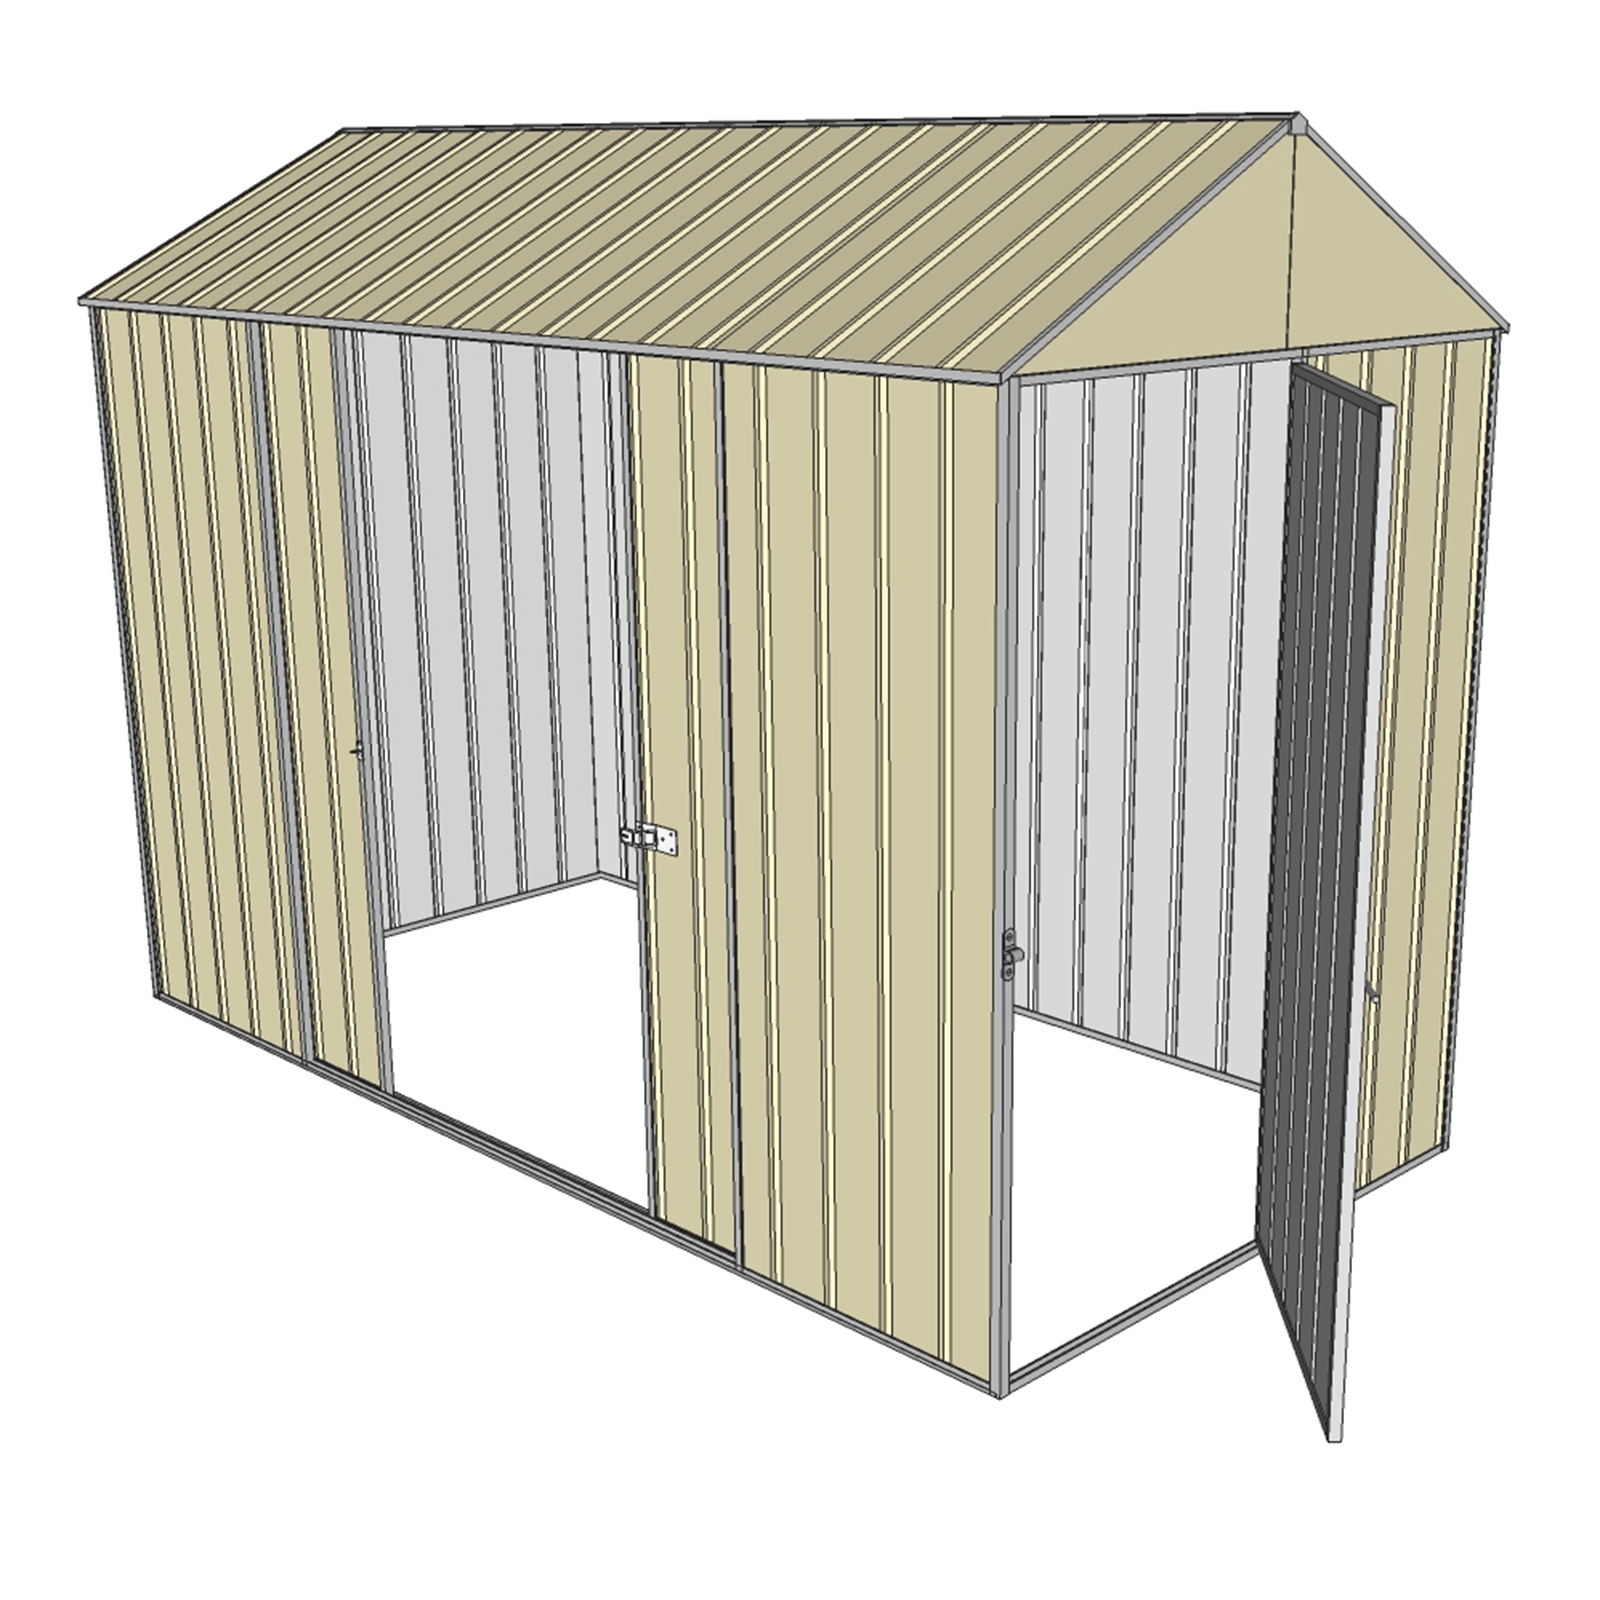 Build-a-Shed 1.5 x 3.0m Cream Front Gable Single Hinged And Double Sliding Doors Narrow Shed